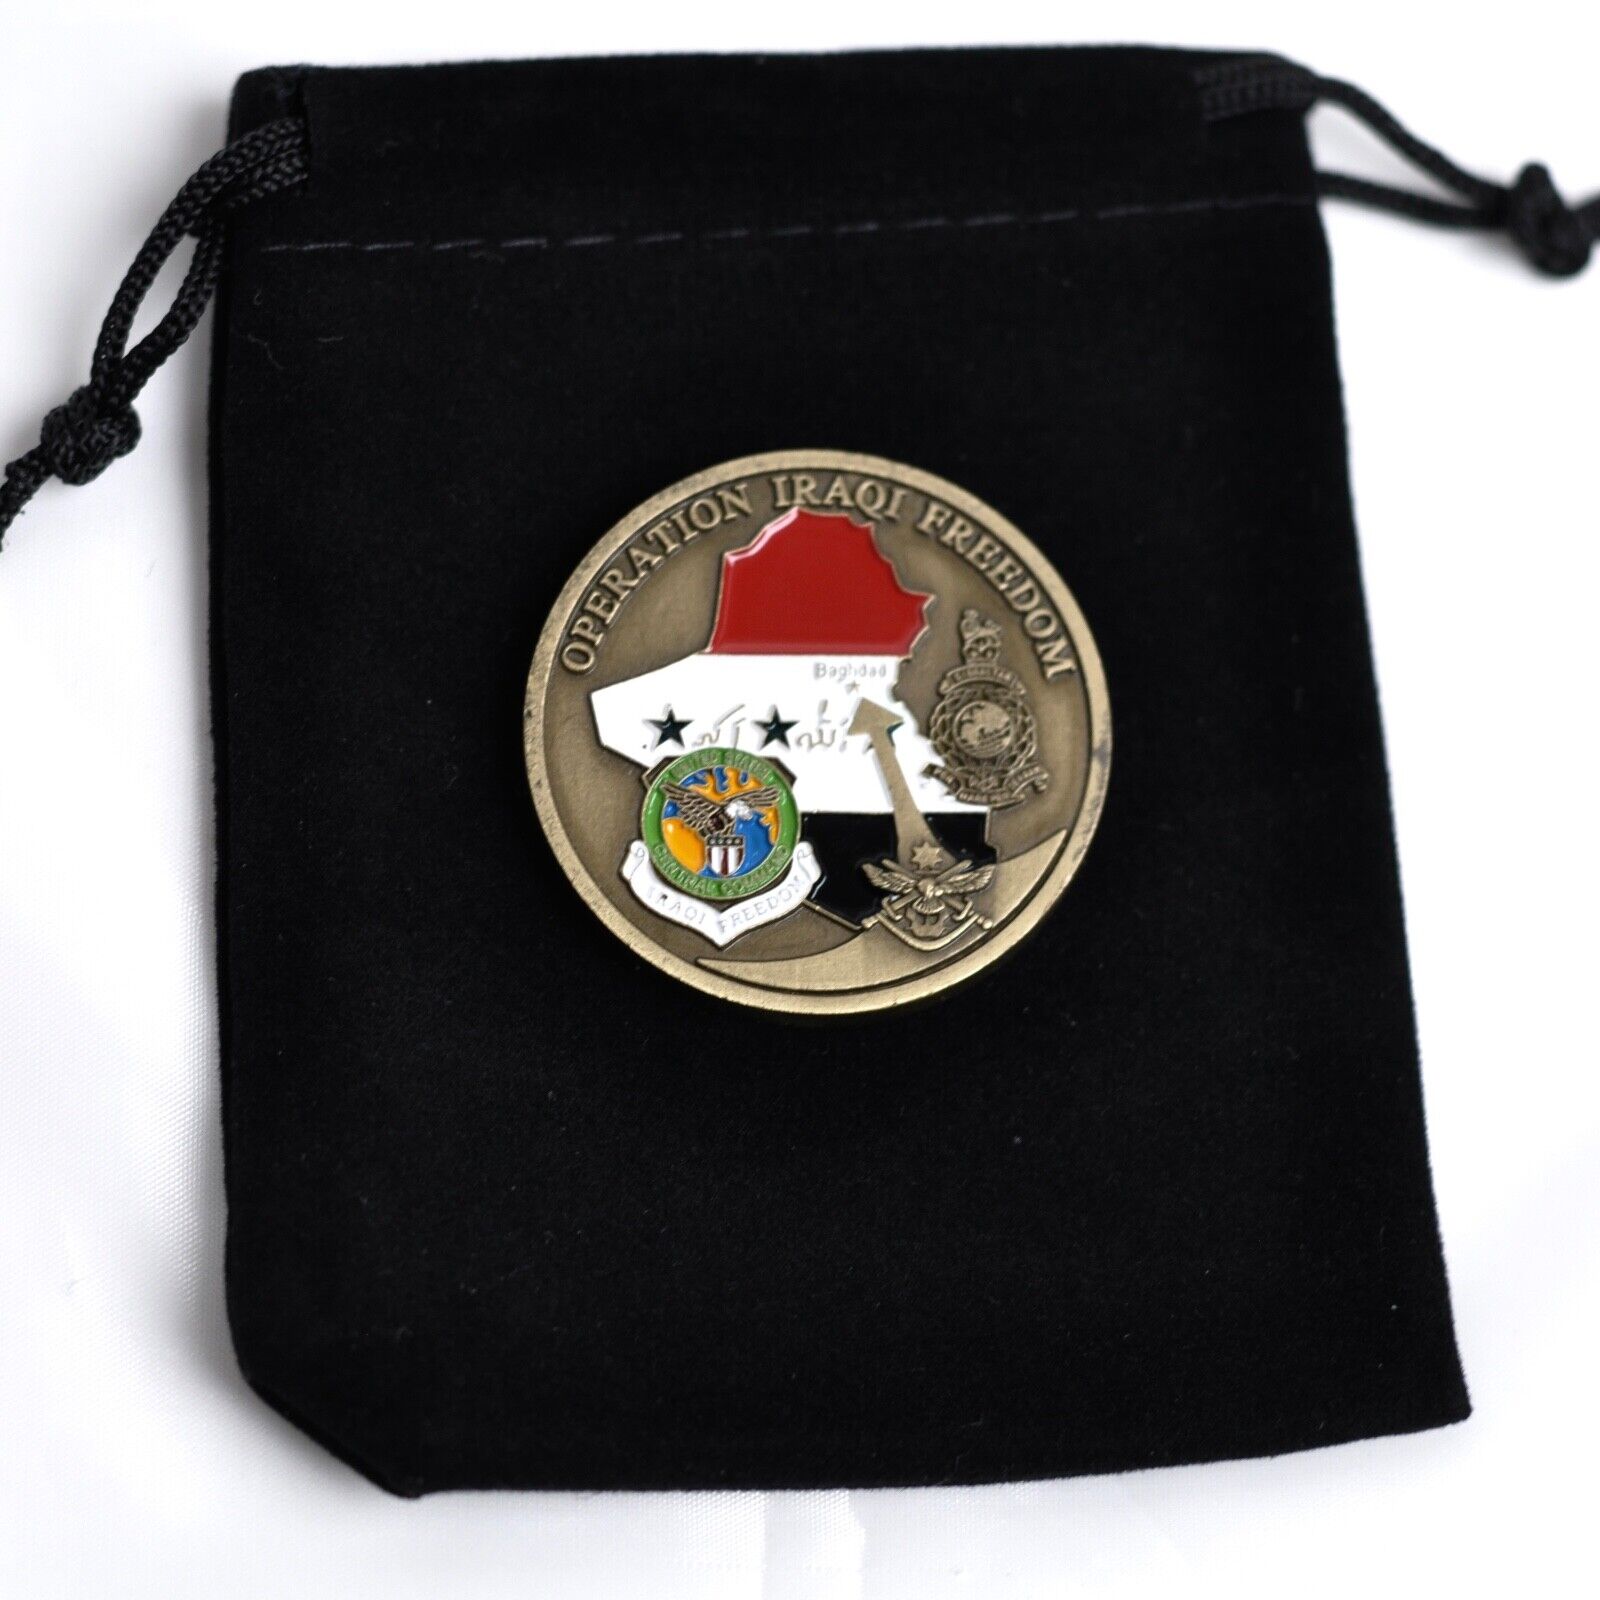 Operation Iraqi Freedom Challenge Coin with Jewelry Bag